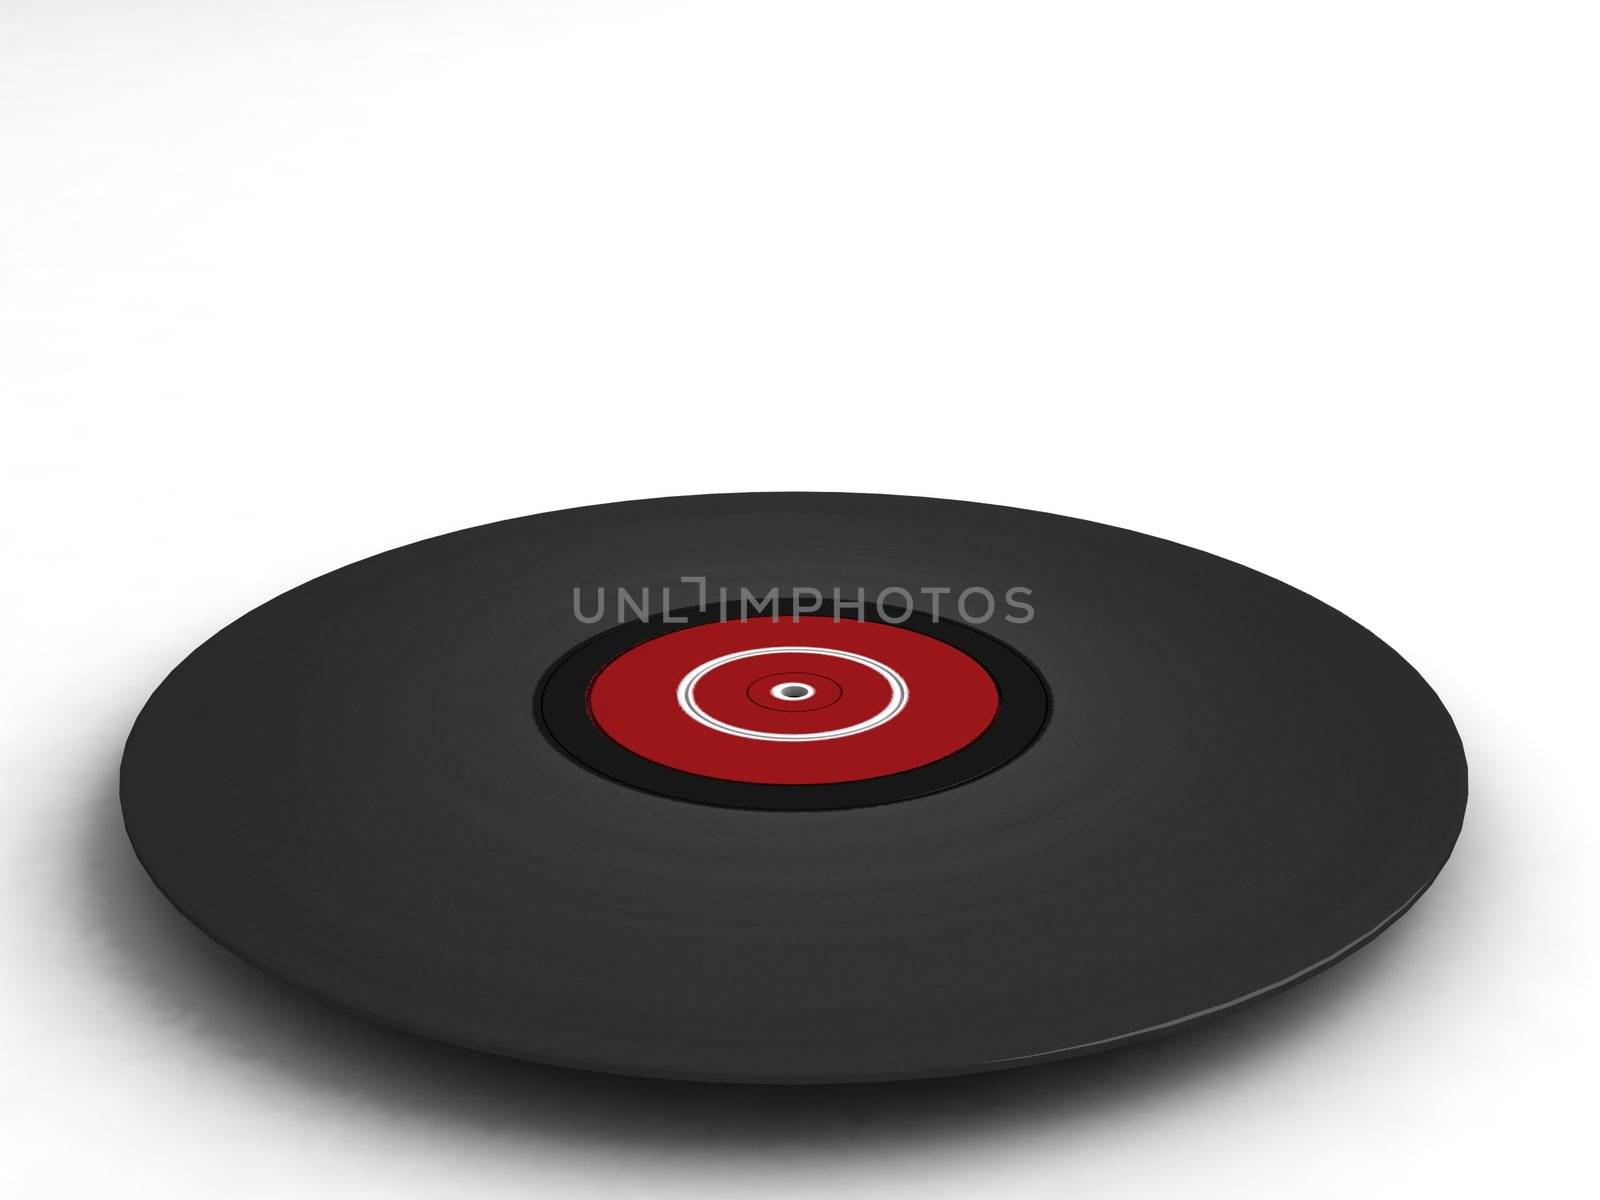 three dimensional  vinyl record by imagerymajestic